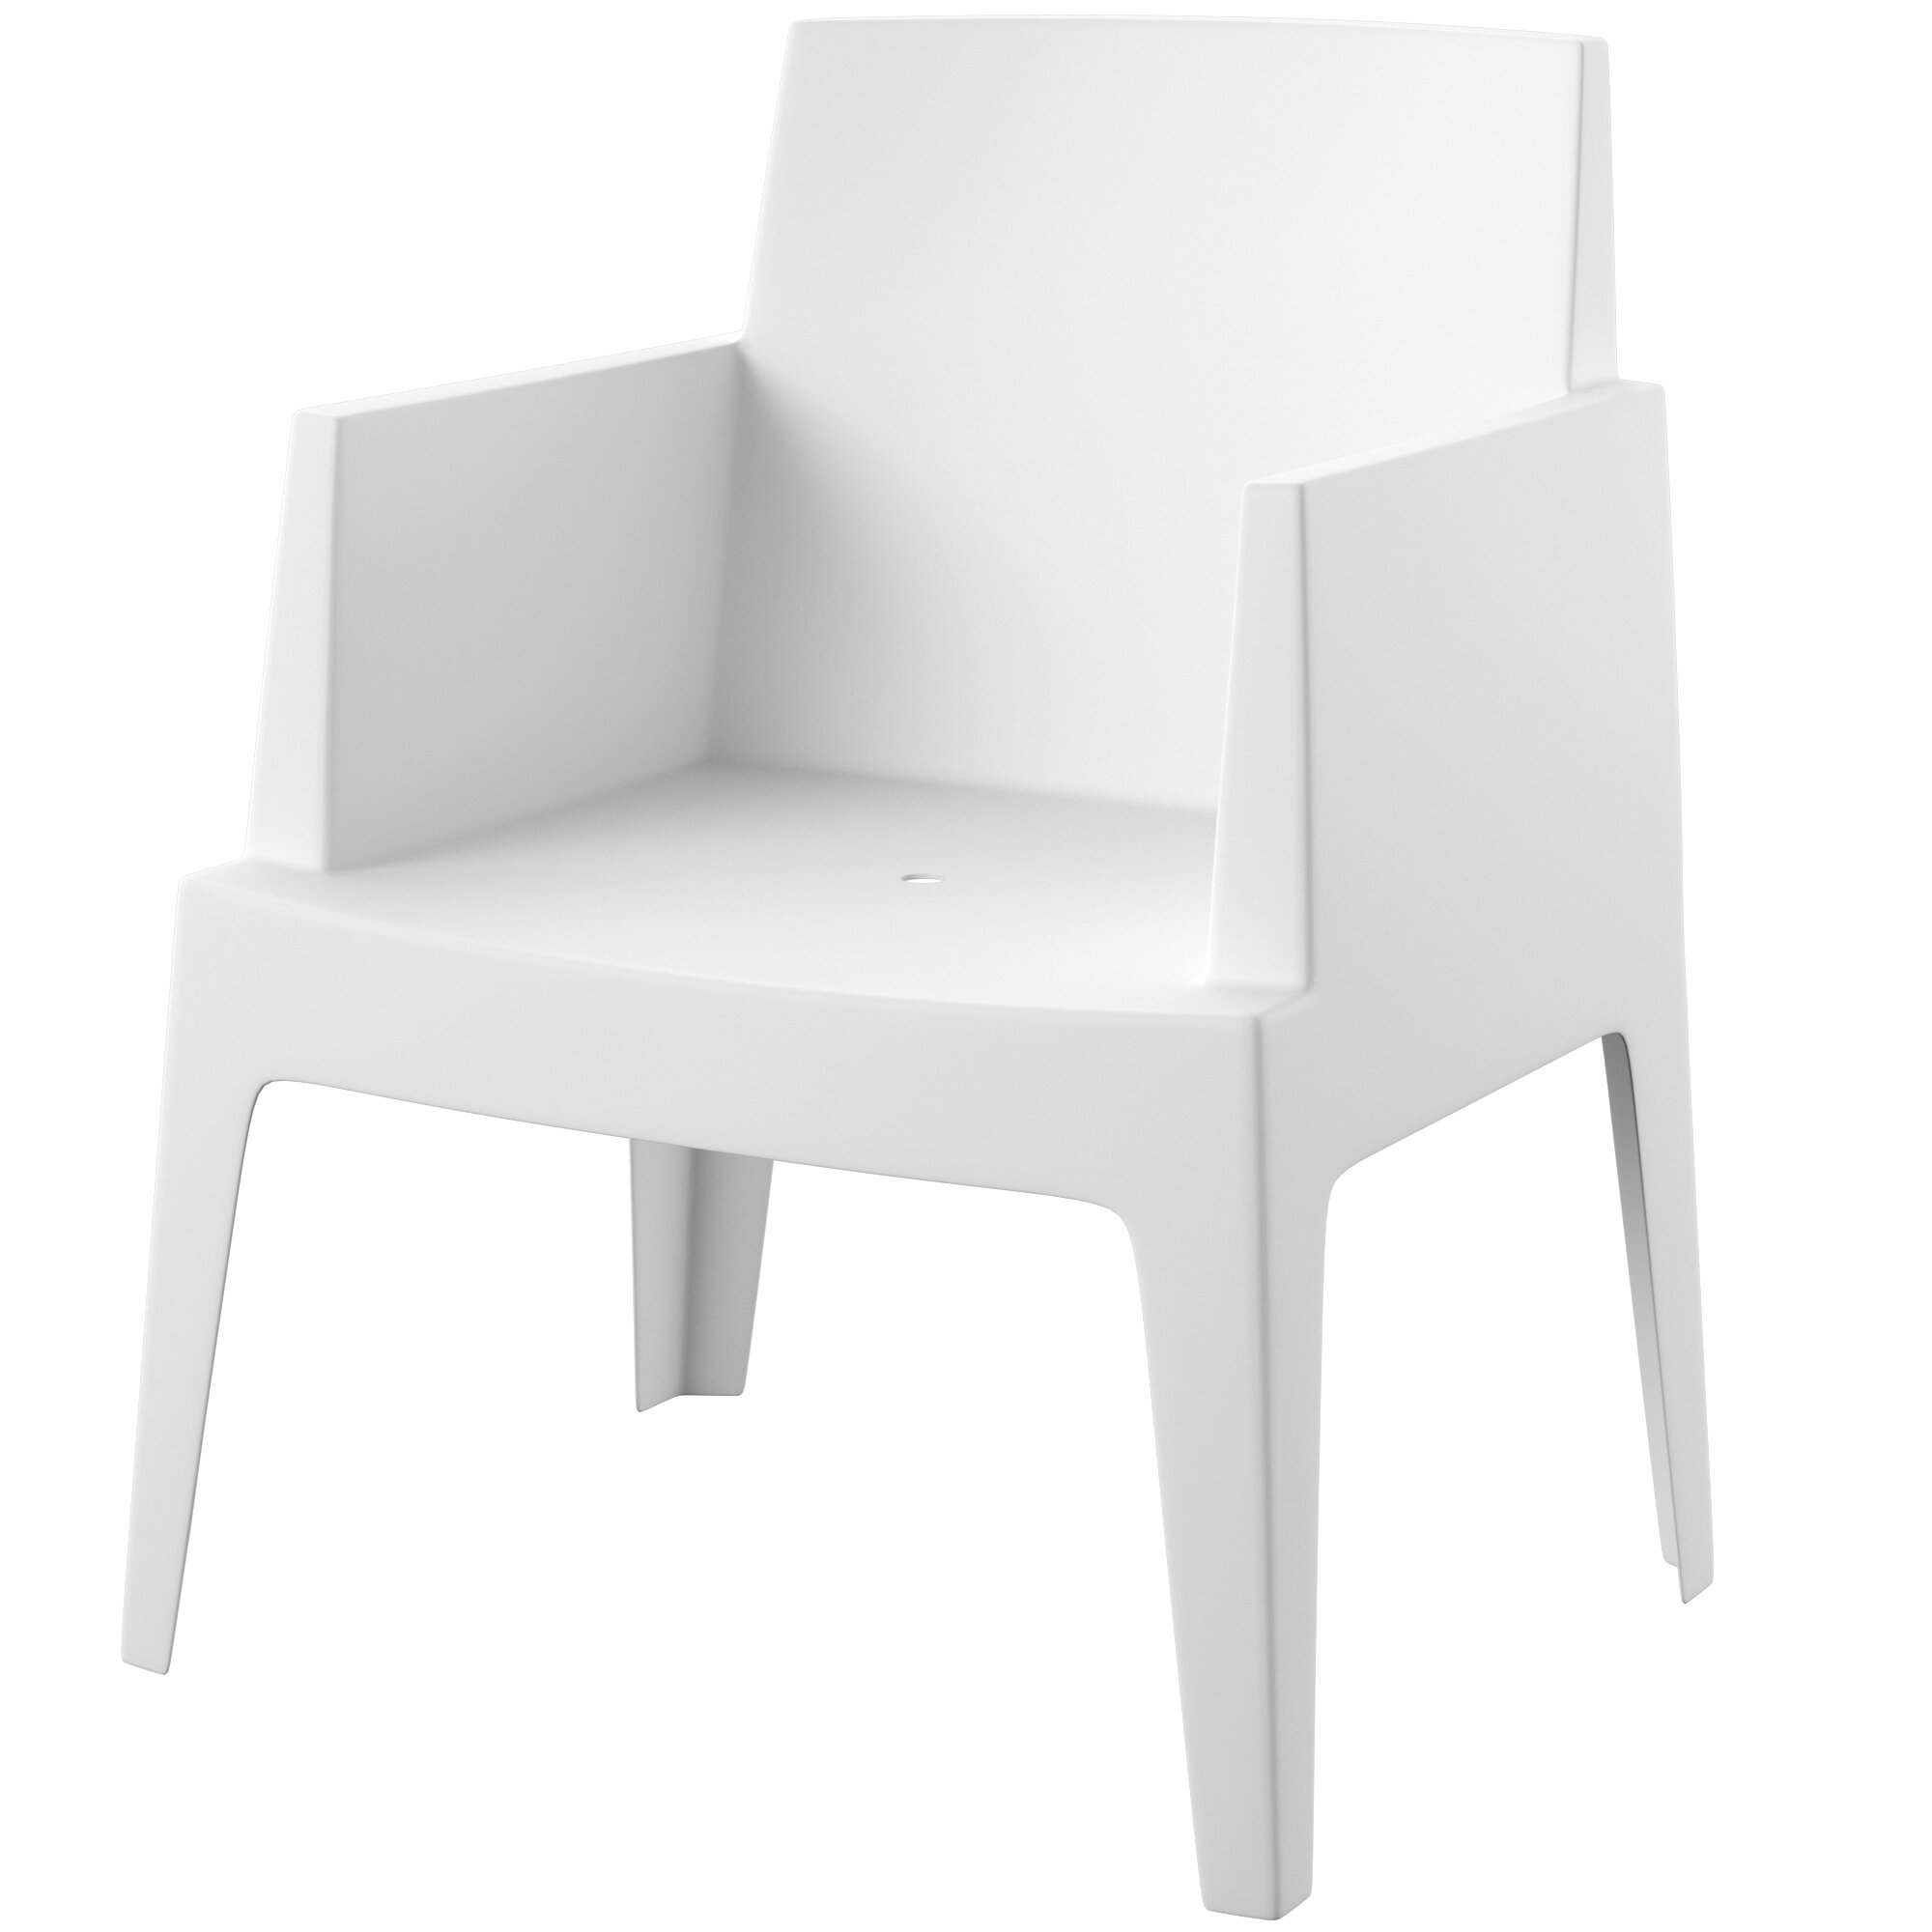 Bence Stacking Patio Dining Chair Reviews Allmodern